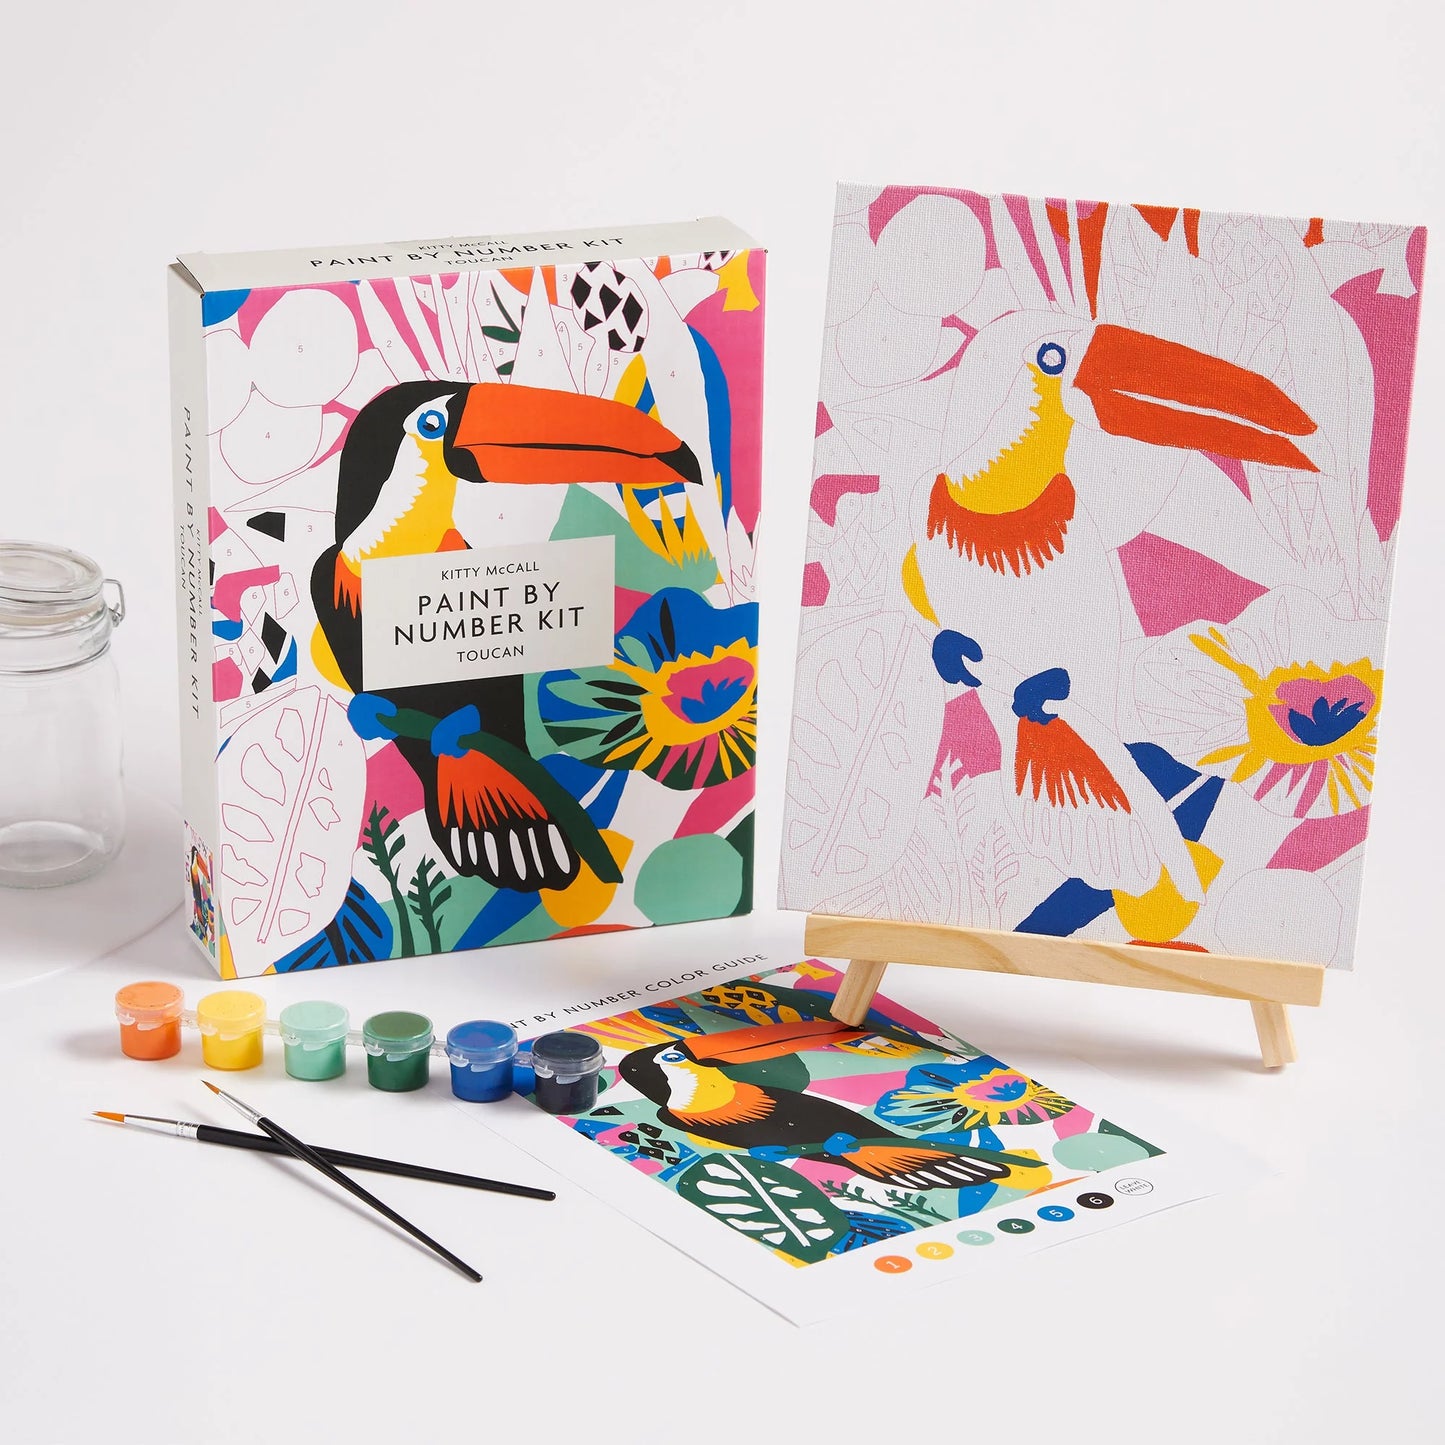 Paint by Numbers Kit - Toucan